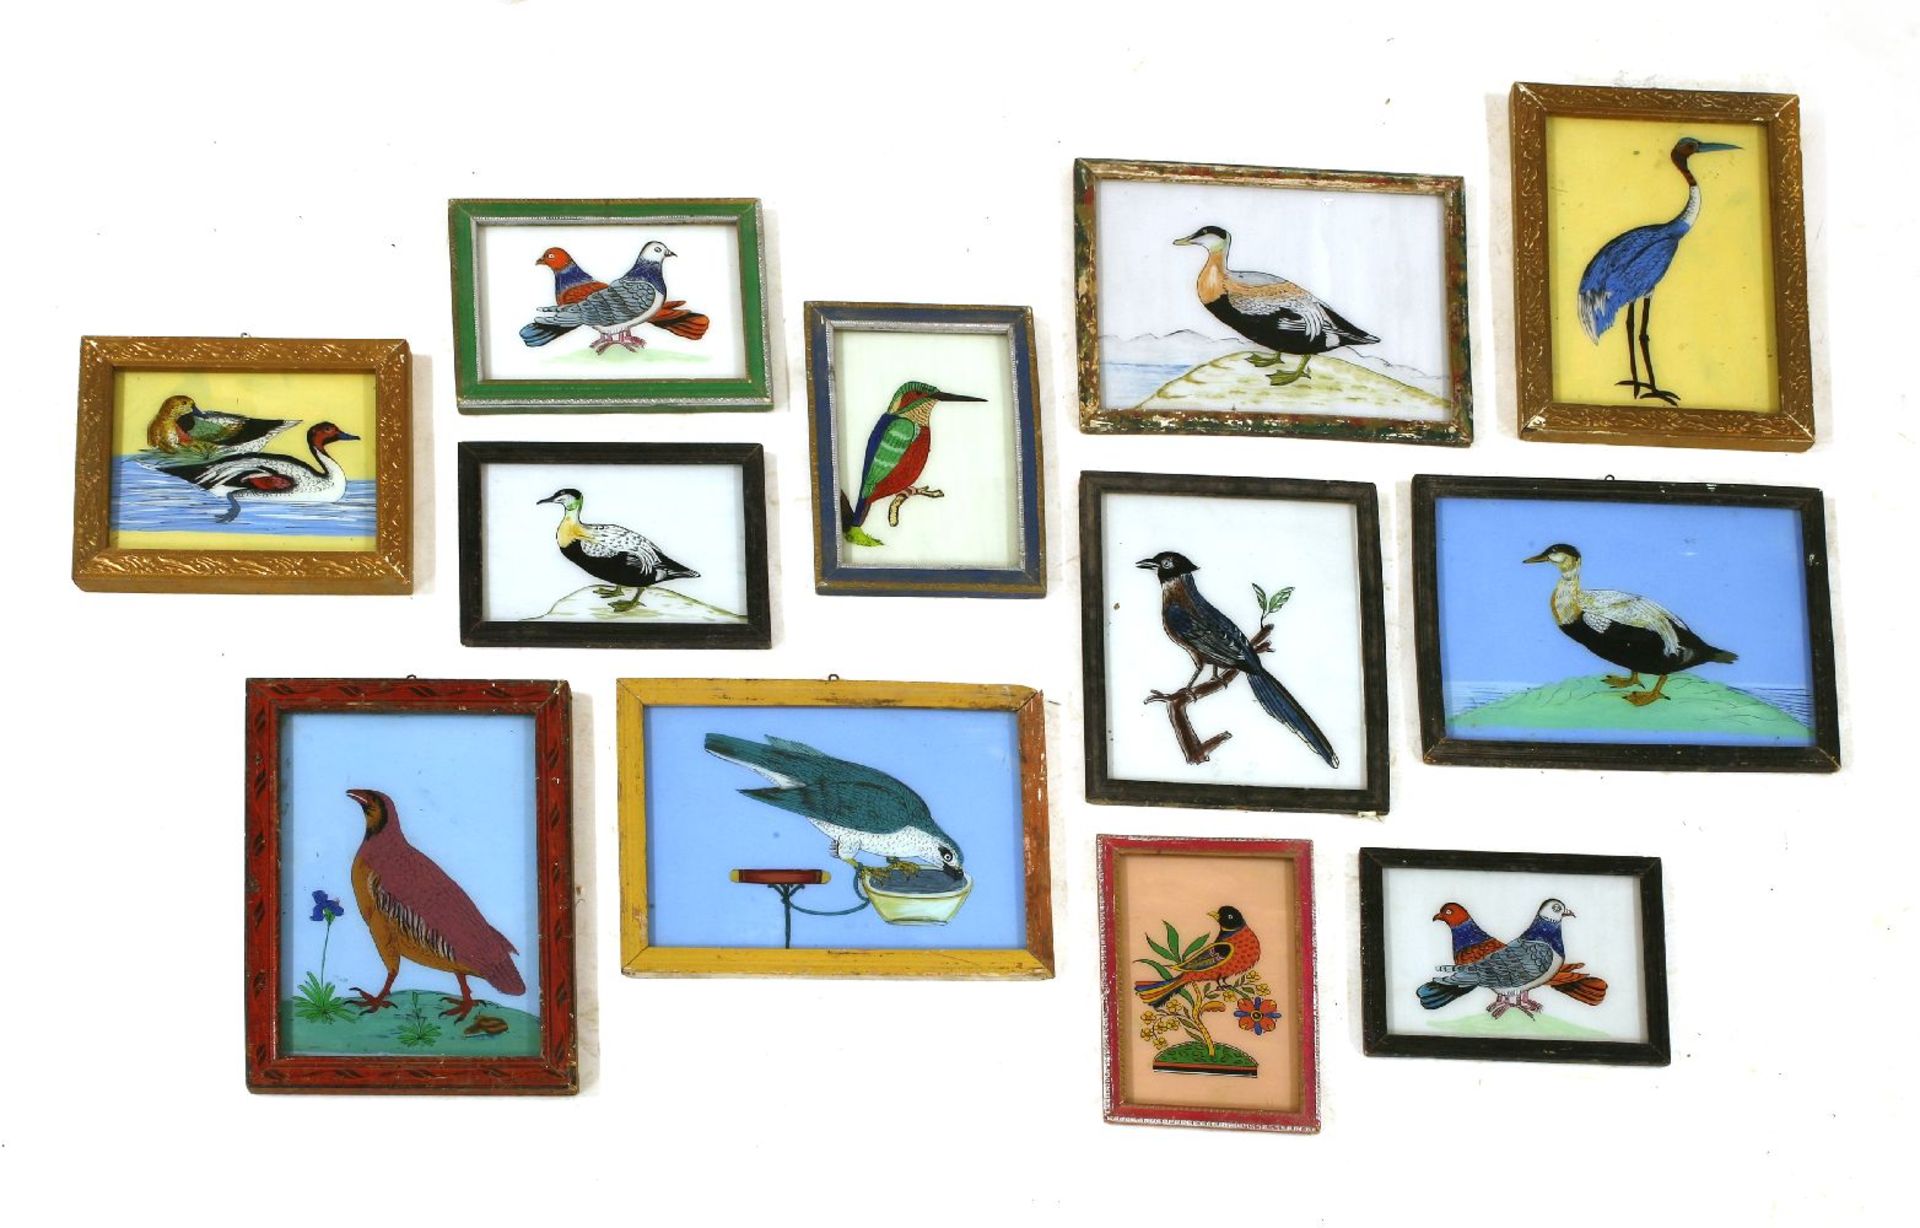 INDIAN REVERSE GLASS PAINTINGS OF BIRDS,late 20th century, a charming group of twelve Indian reverse